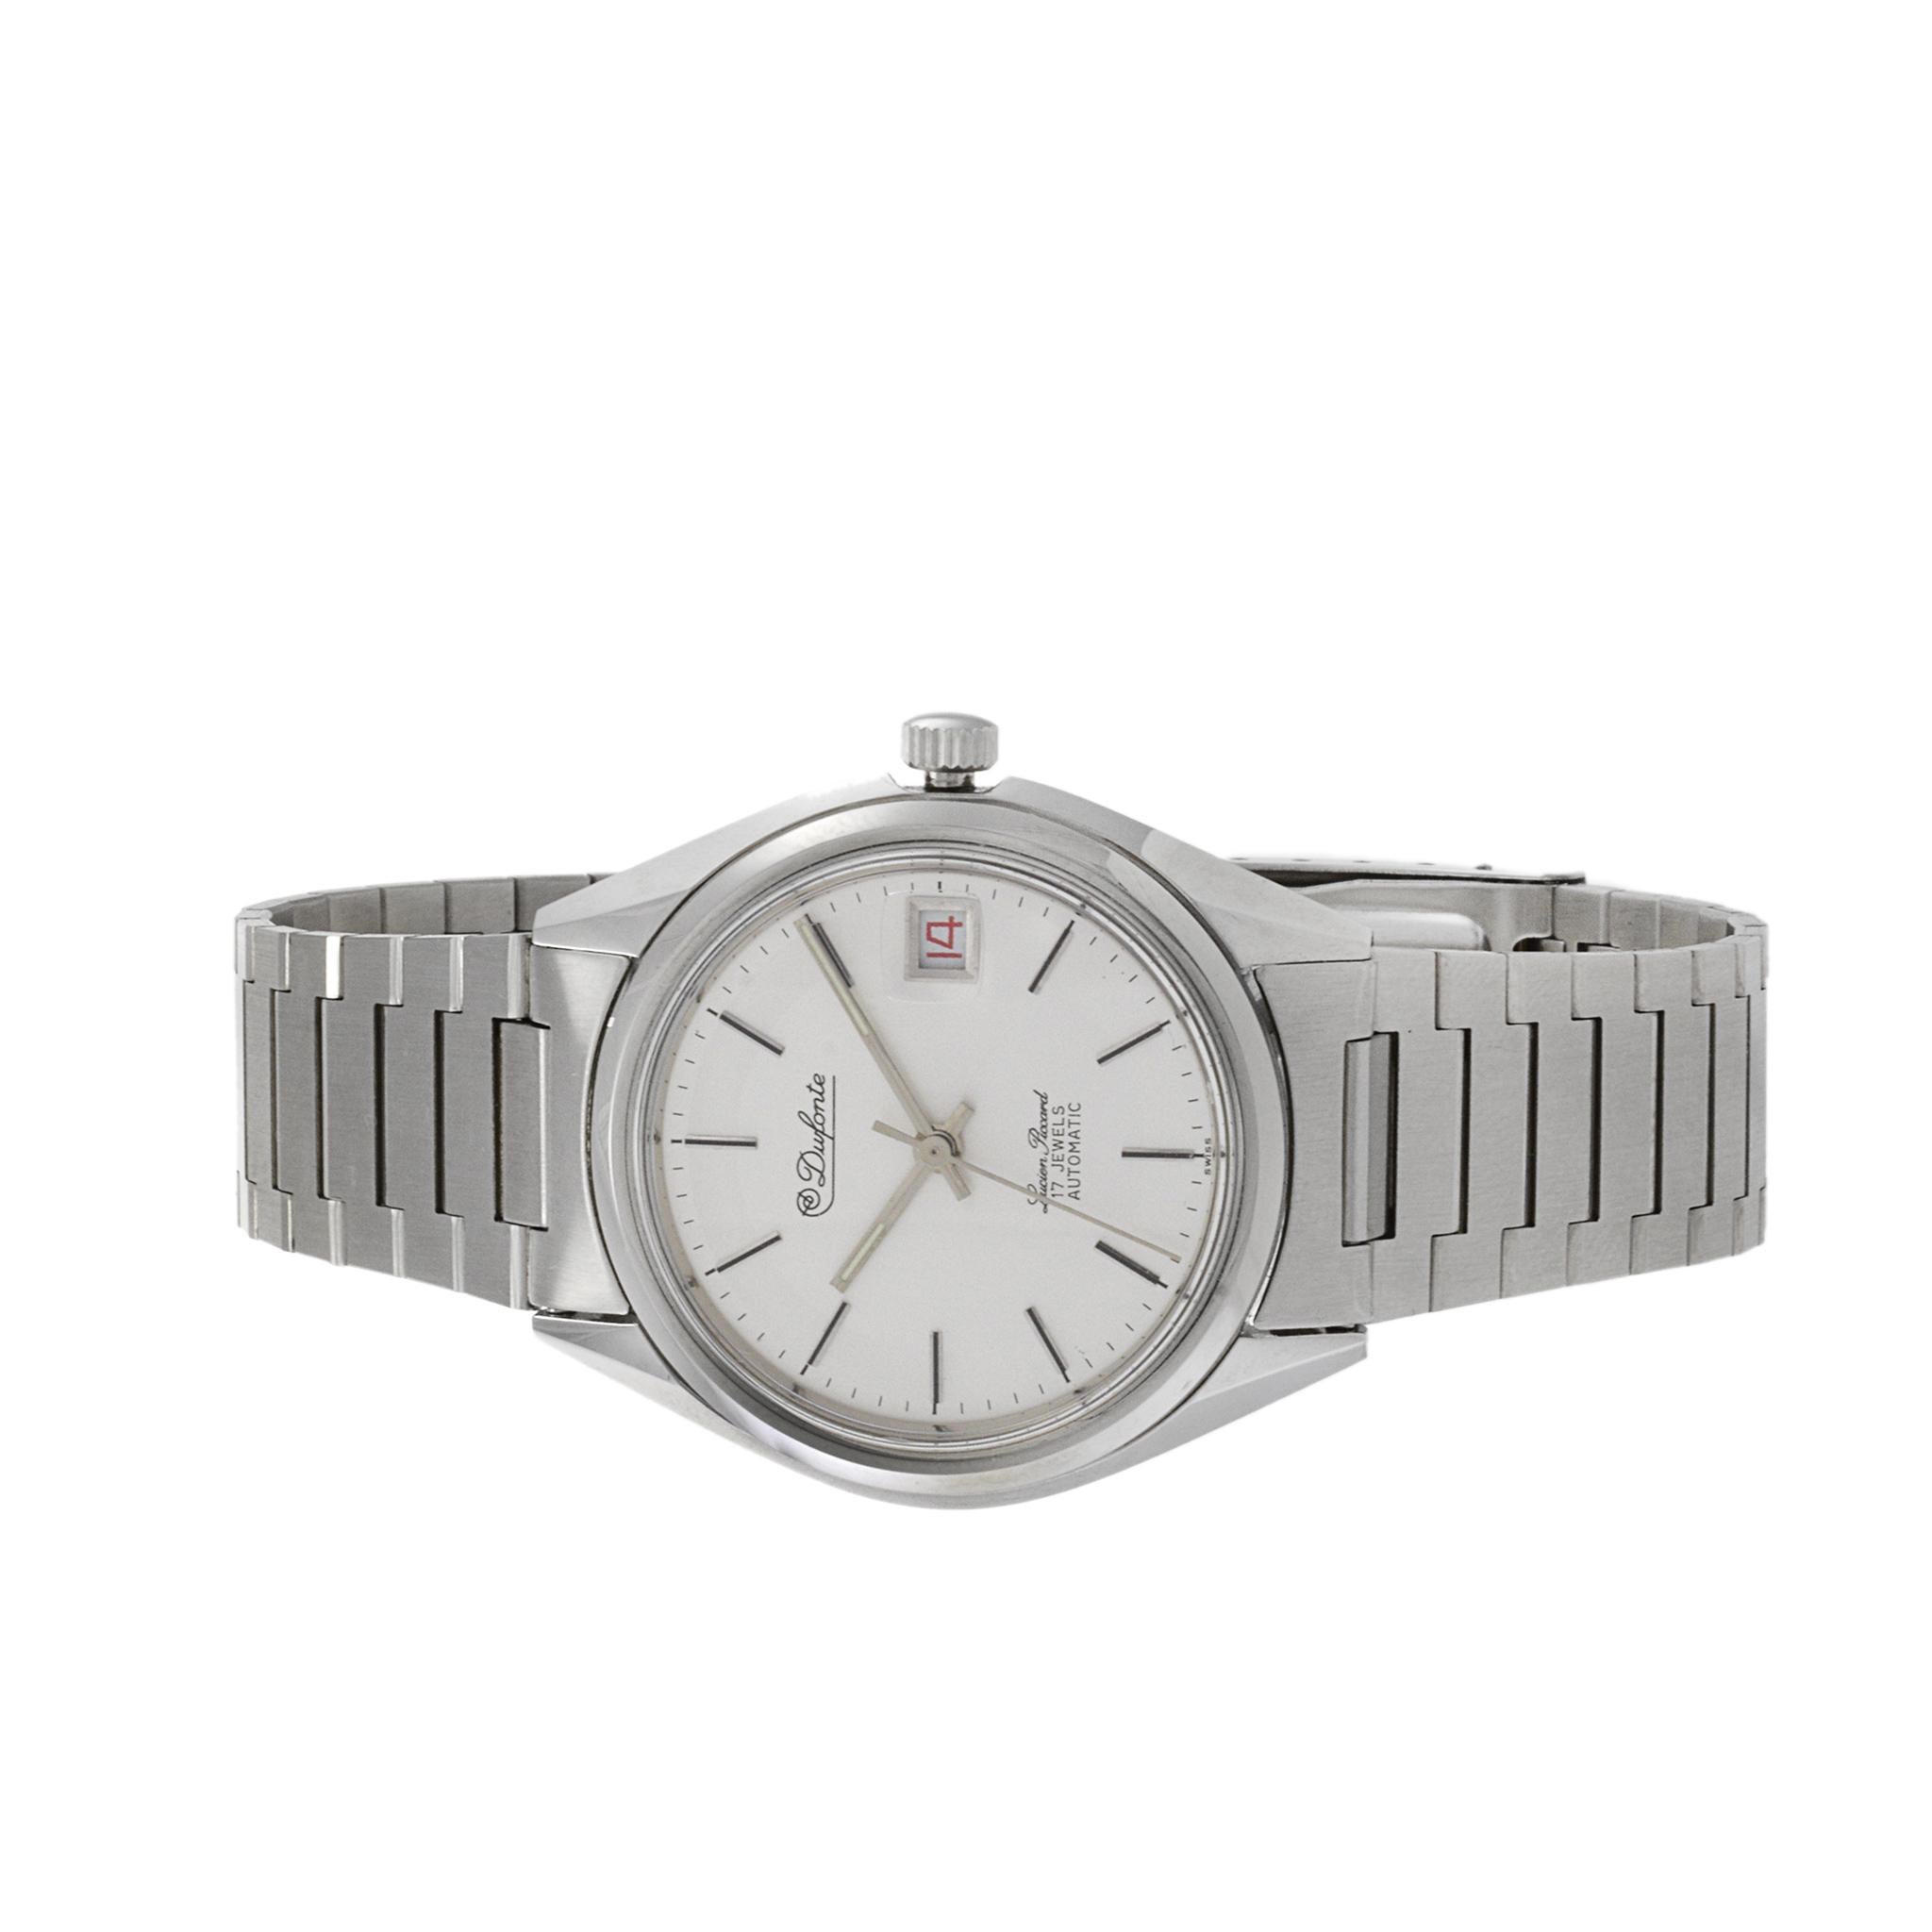 Women's or Men's Lucien Piccard Dufonte Calatrava Watch with Date For Sale